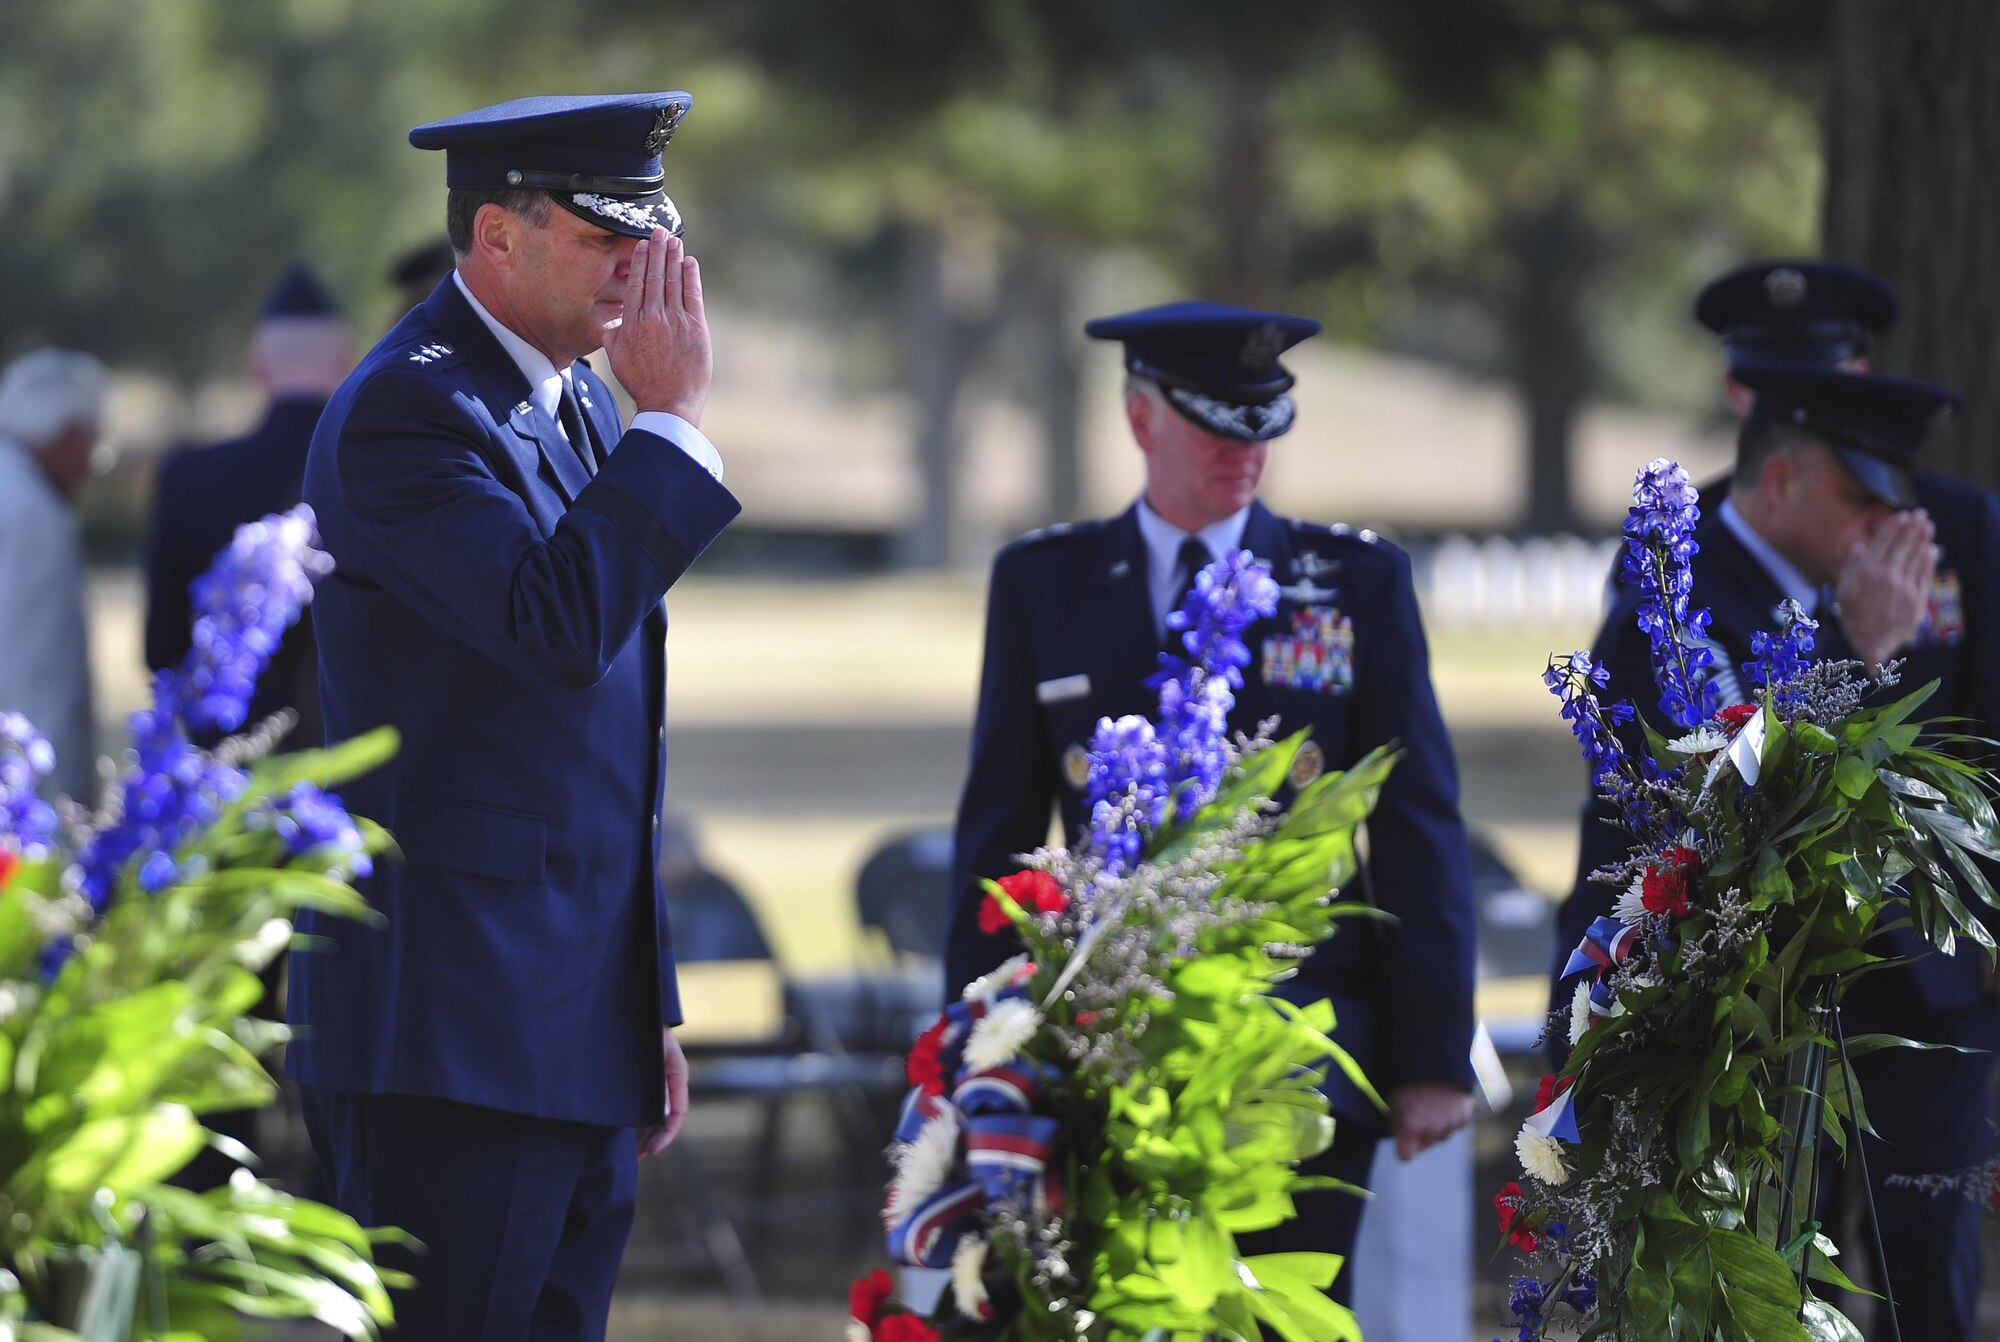 Lt. Gen. Brad Heithold, Air Force Special Operations Command commander, salutes the graves of Spirit 03 crew members during a remembrance ceremony at Barrancas National Cemetery on Naval Air Station Pensacola, Fla., Jan. 31, 2015. Losing Spirit 03 and its crew members was the largest single loss by an Air Force unit during Operation Desert Storm. (U.S. Air Force photo/Airman 1st Class Jeff Parkinson)